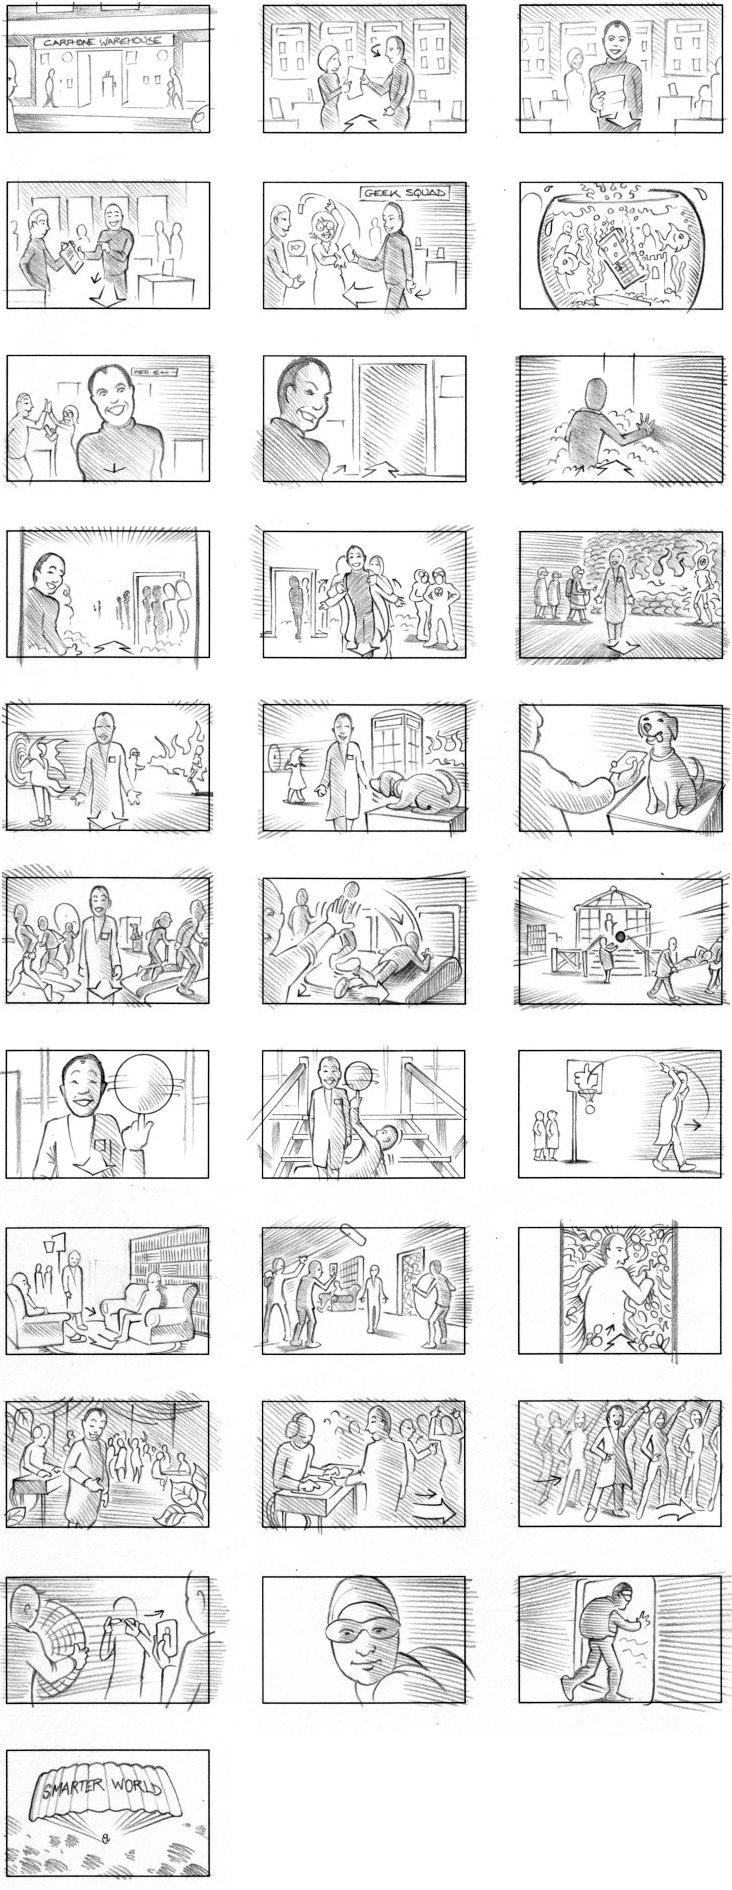 CARPHONE WAREHOUSE STORYBOARD BY ANDY SPARROW